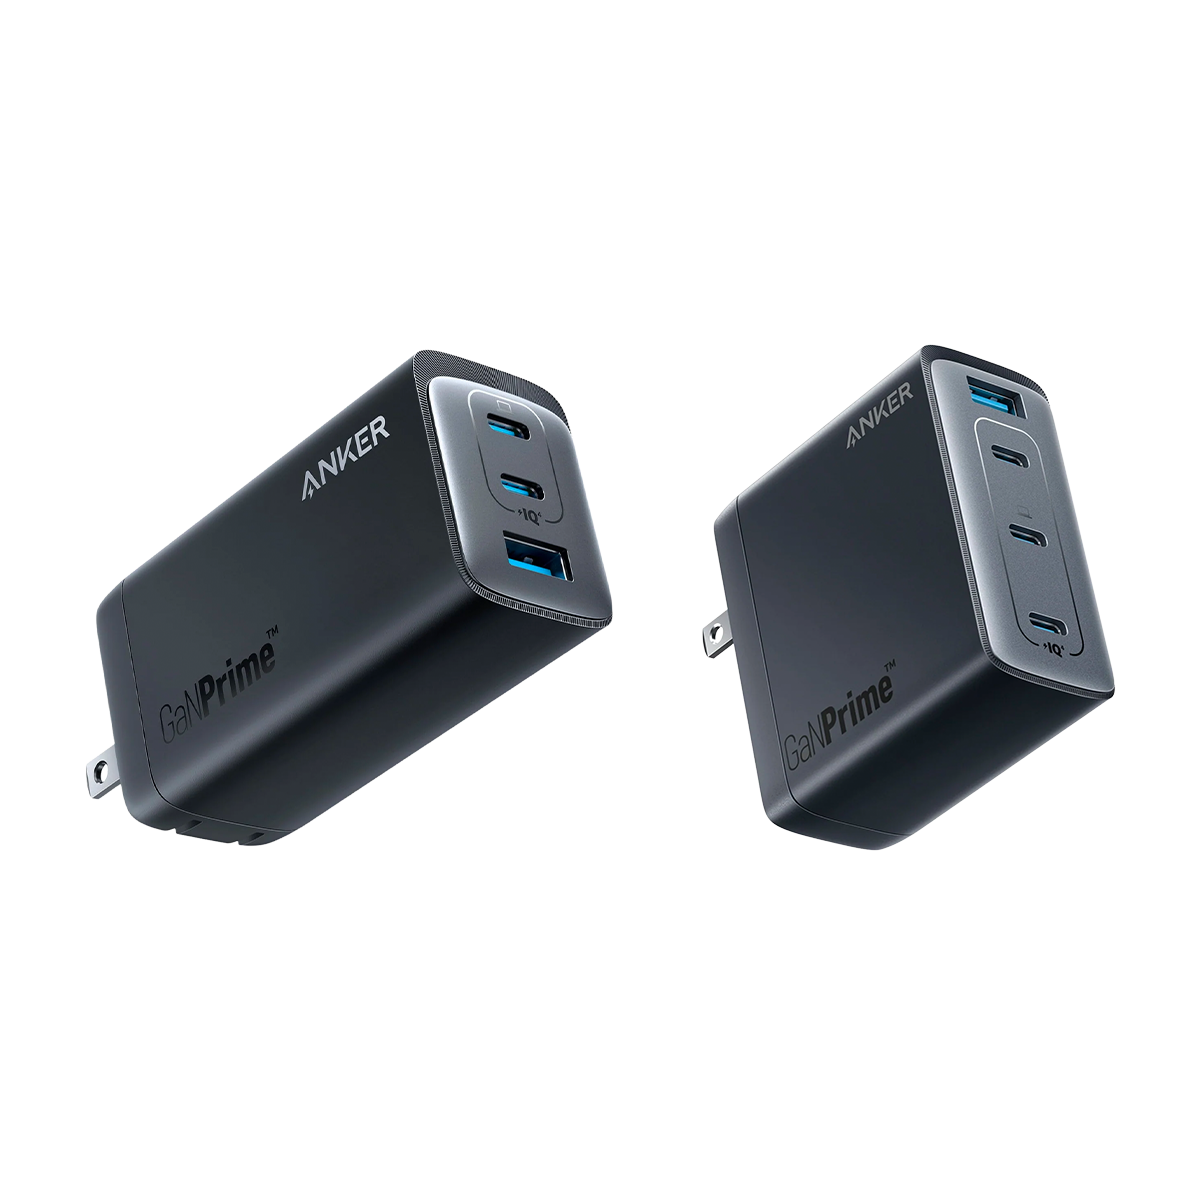 Anker 737 Charger (GaNPrime 120W) and Anker 747 Charger (GaNPrime 150W)